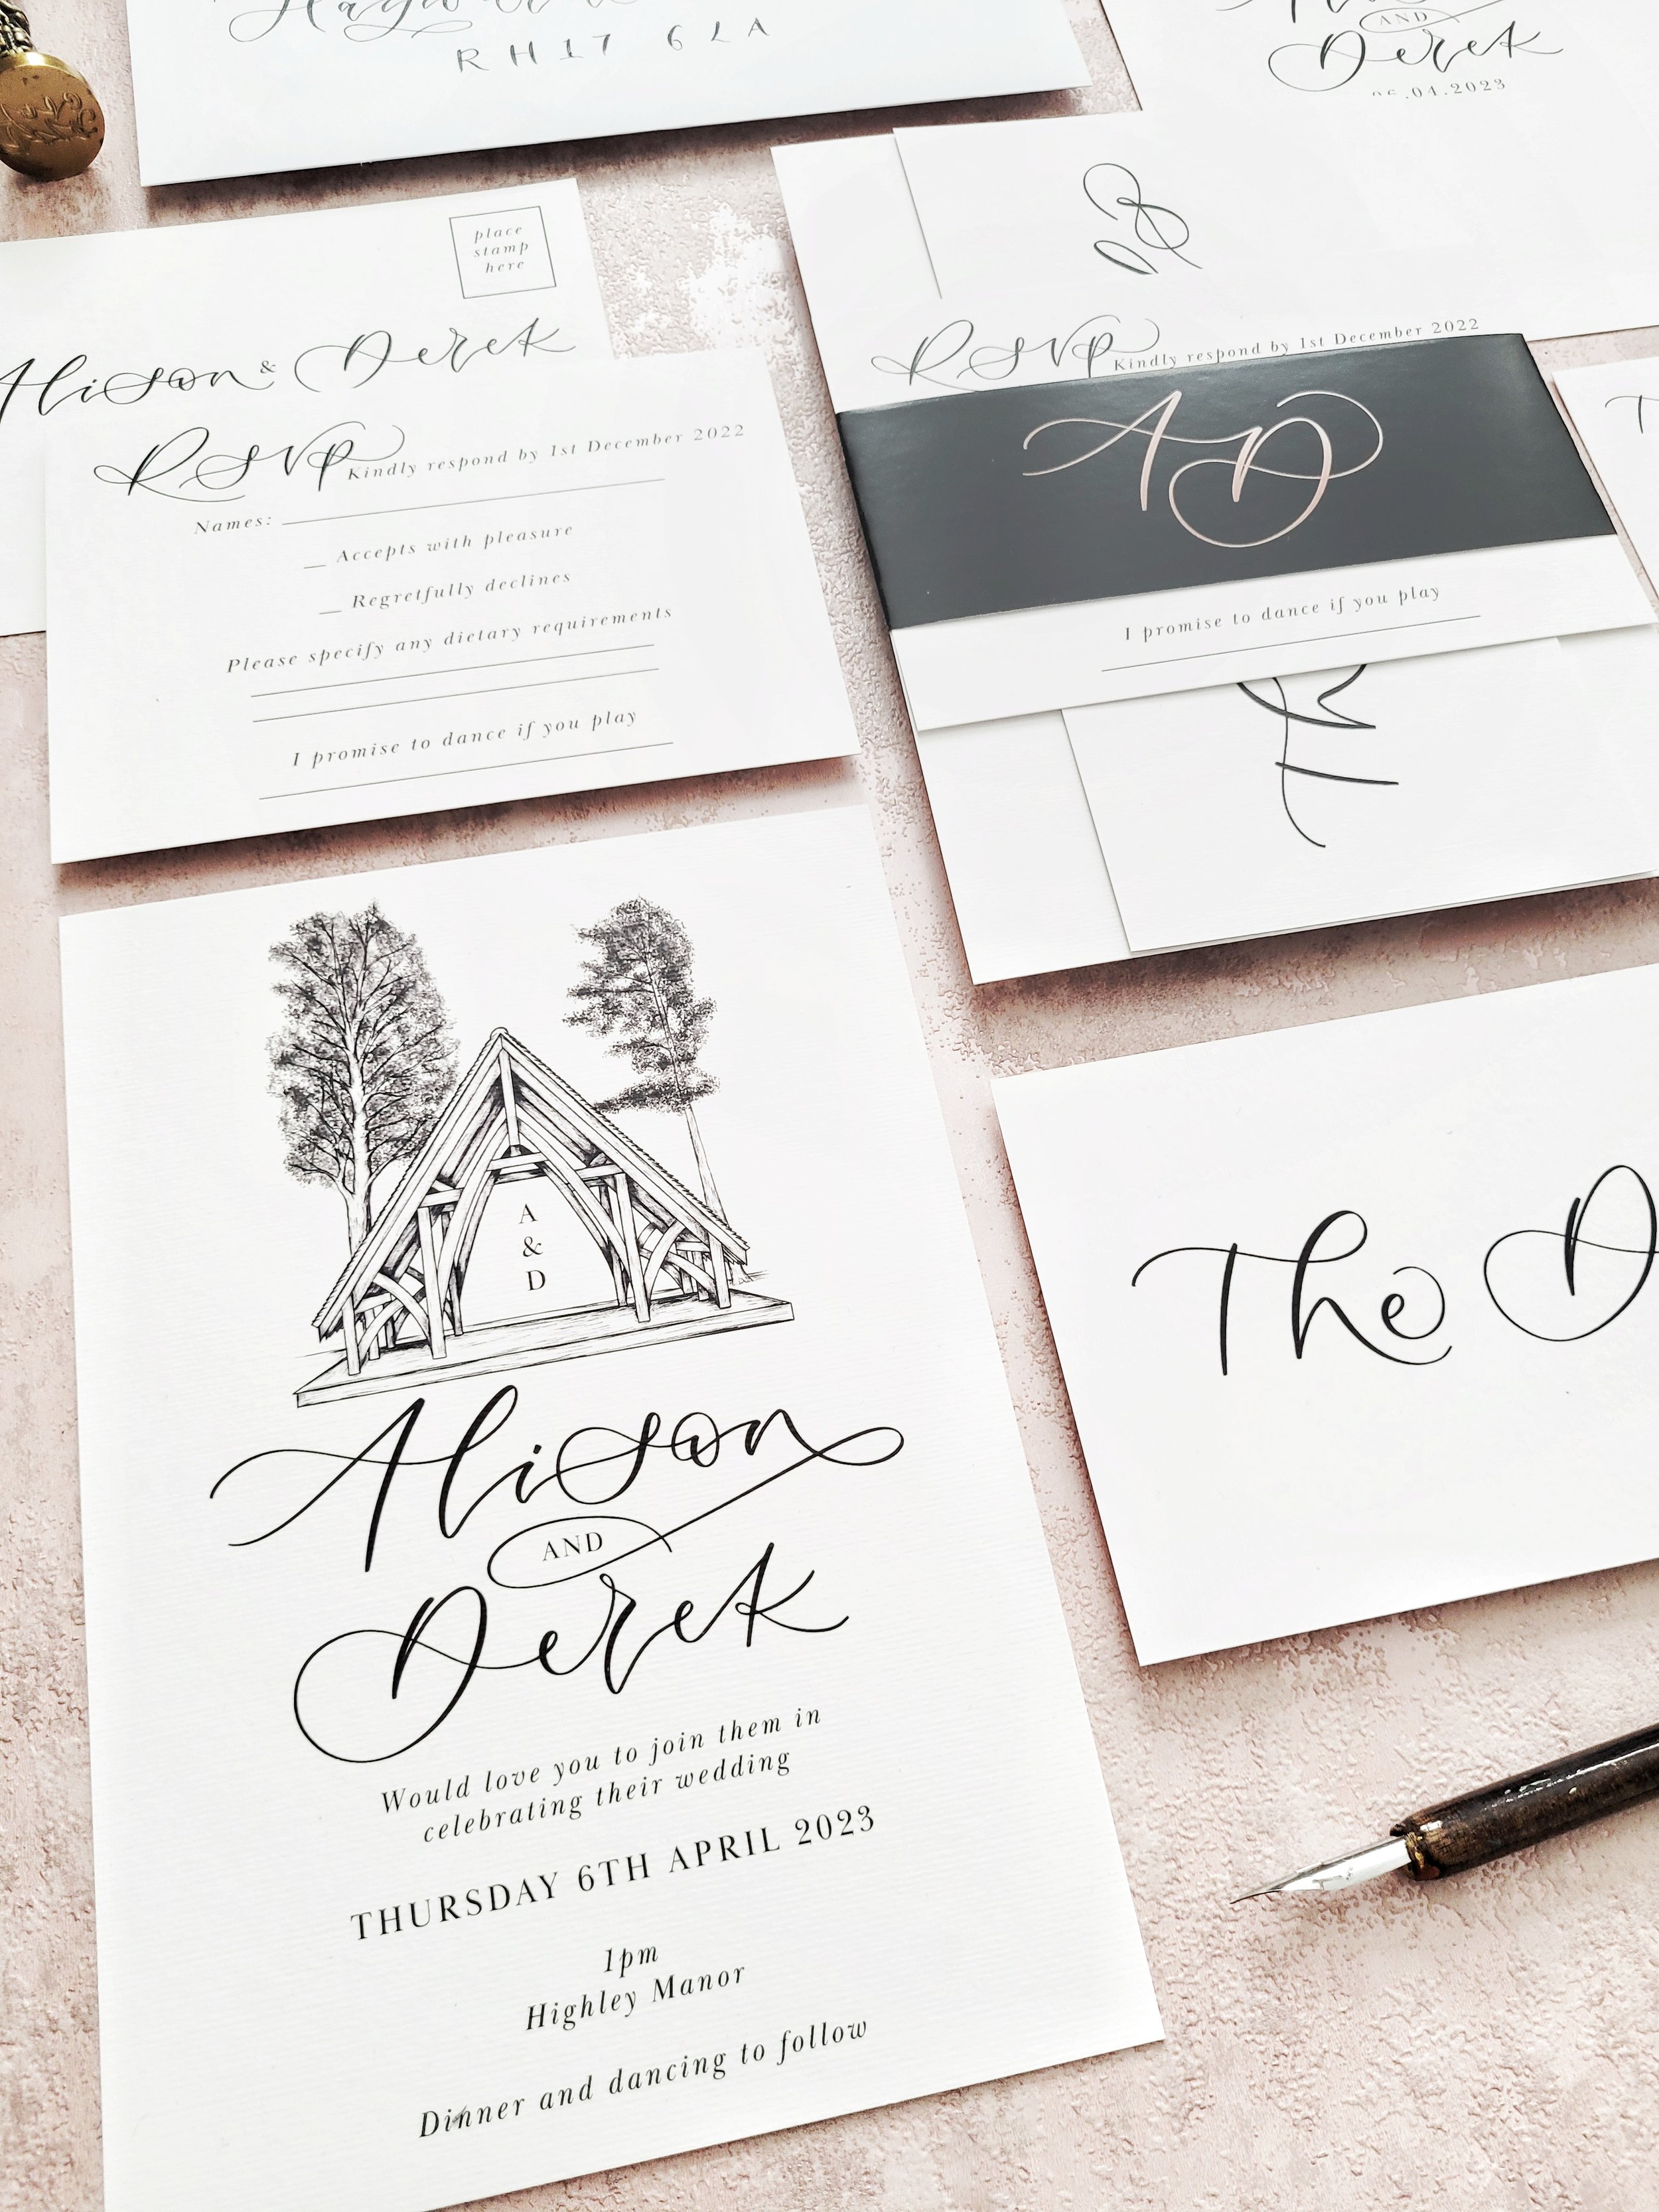 Highley Manor wedding stationery with venue illustration and modern calligraphy - monochrome minimalist invitation set - invitation set with belly band and details card.jpeg